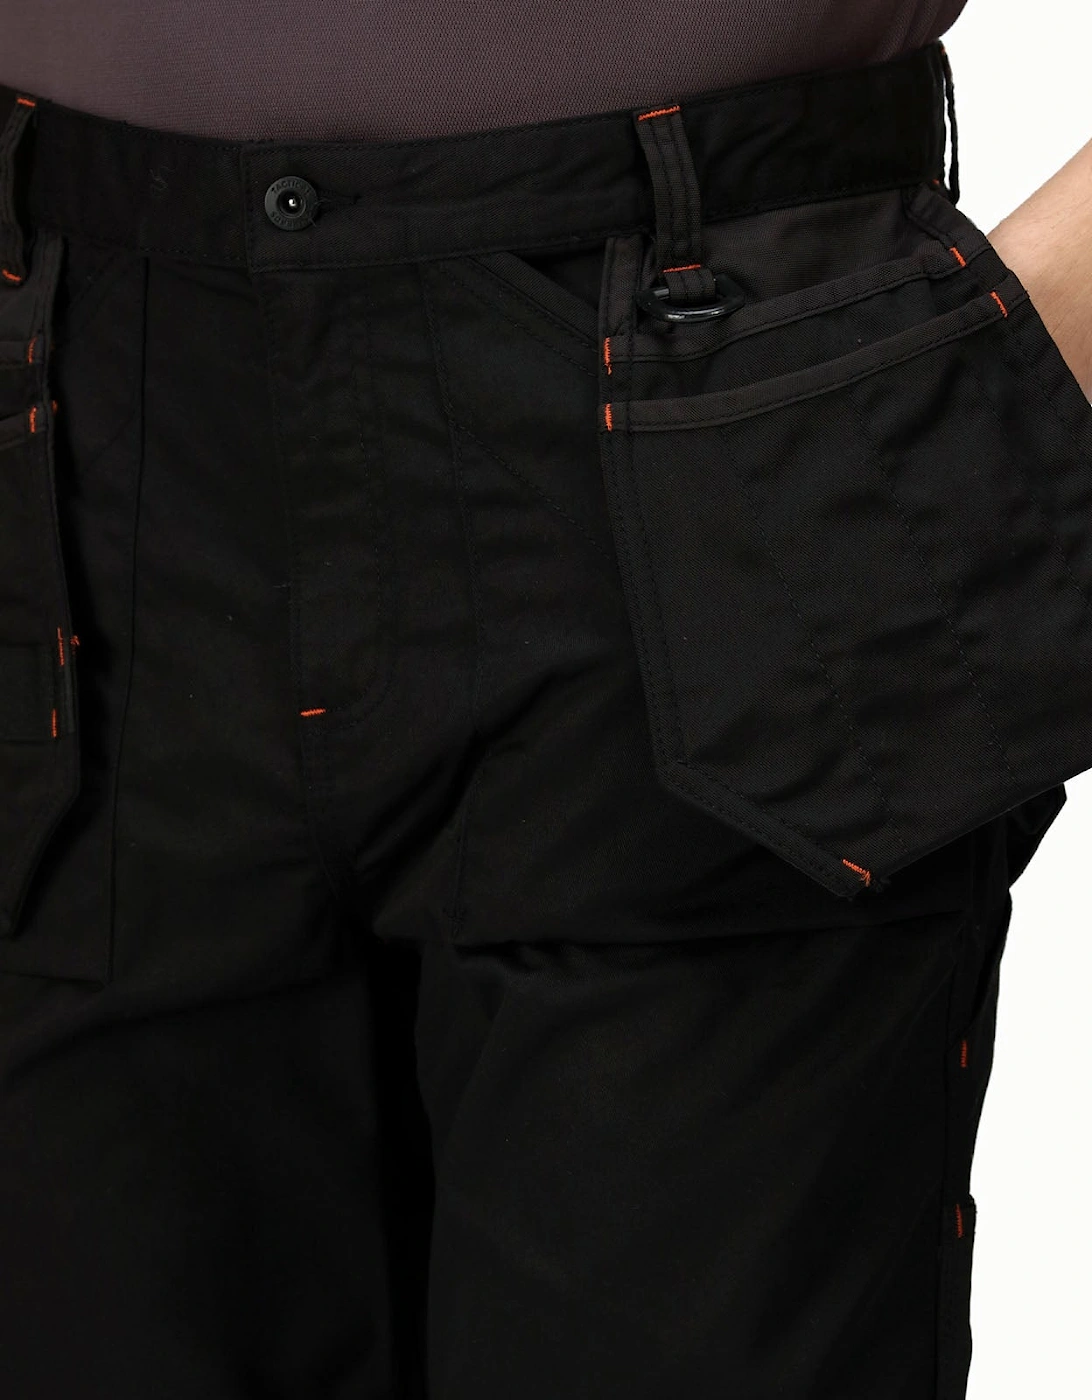 Professional Mens Incursion Holster Workwear Trousers - Black